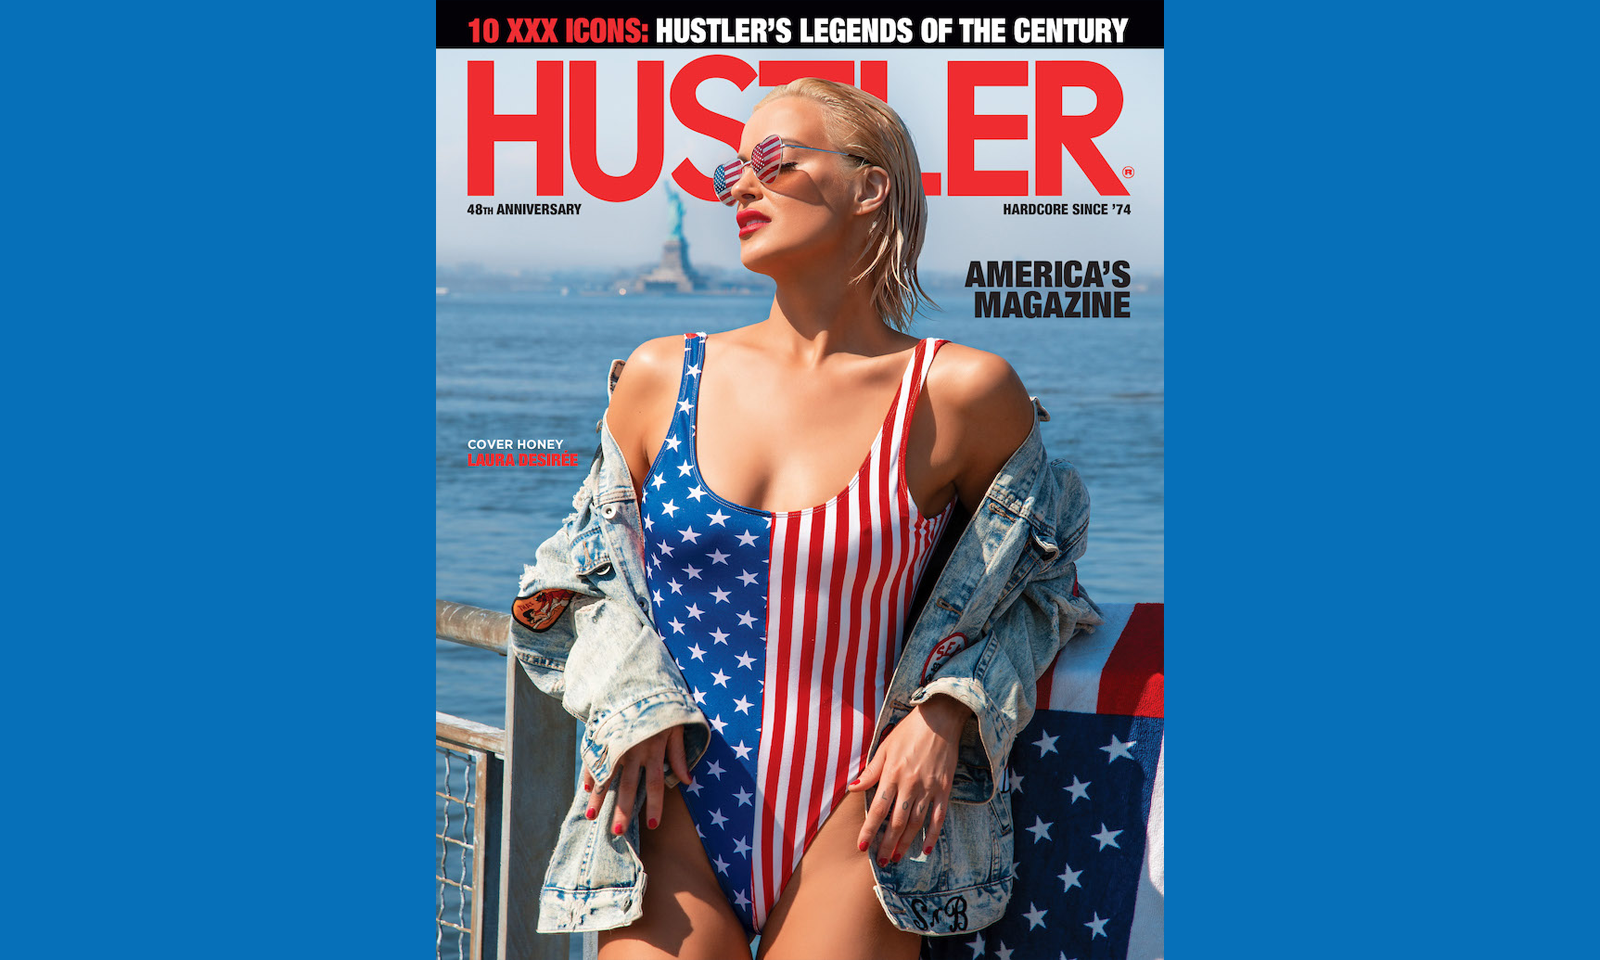 'Hustler' 48th Anniversary Issue Hits Stands Today